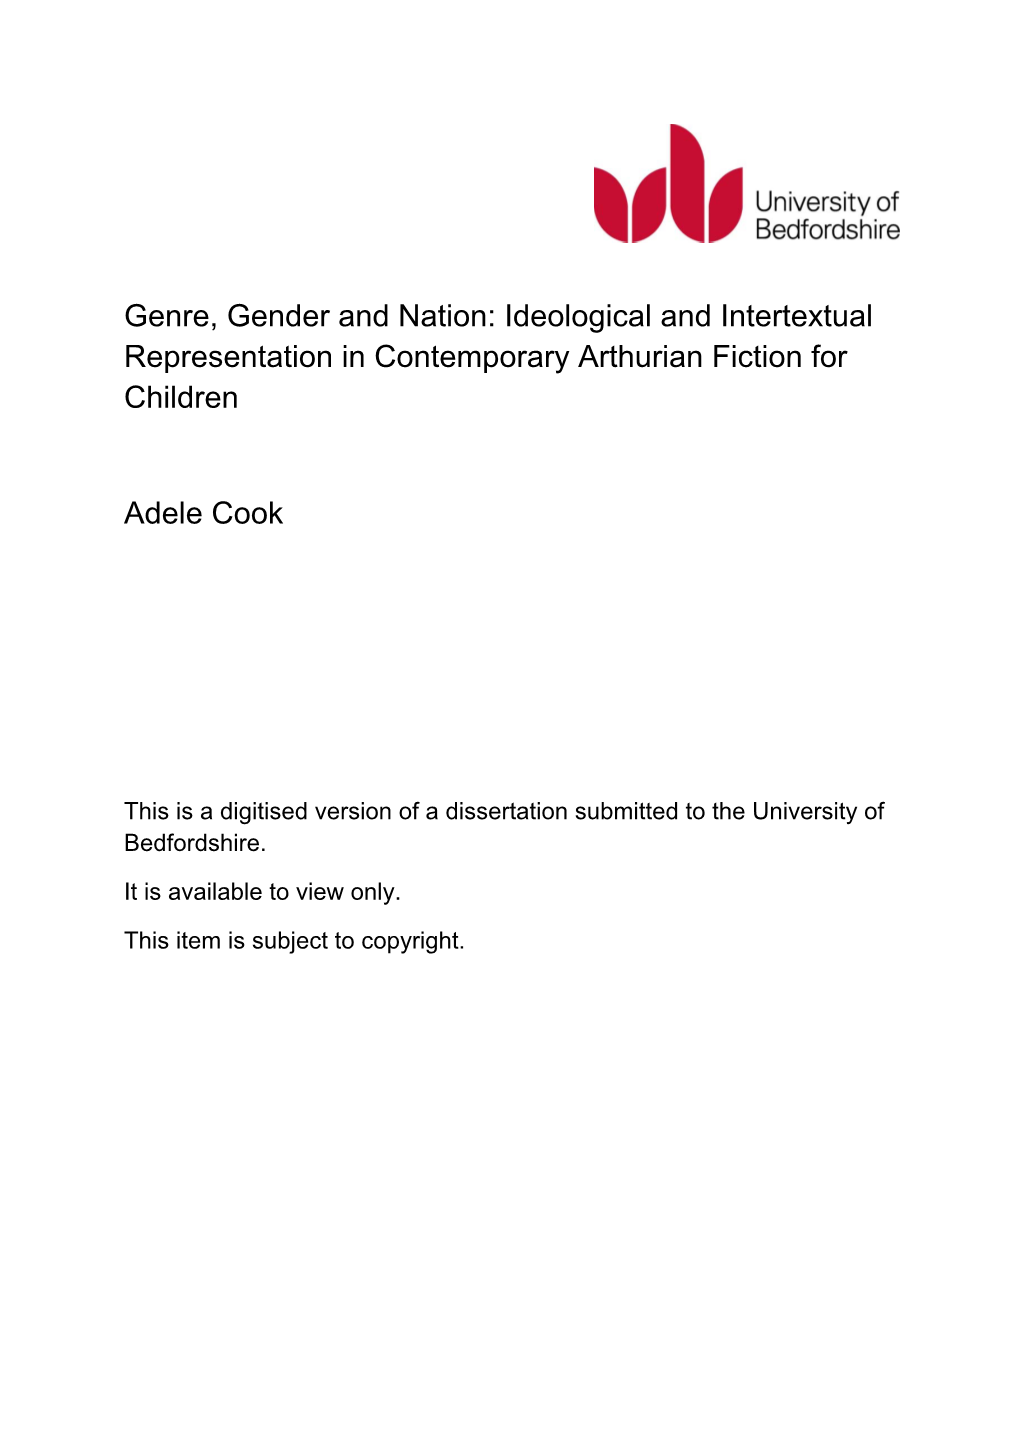 Genre, Gender and Nation: Ideological and Intertextual Representation in Contemporary Arthurian Fiction for Children